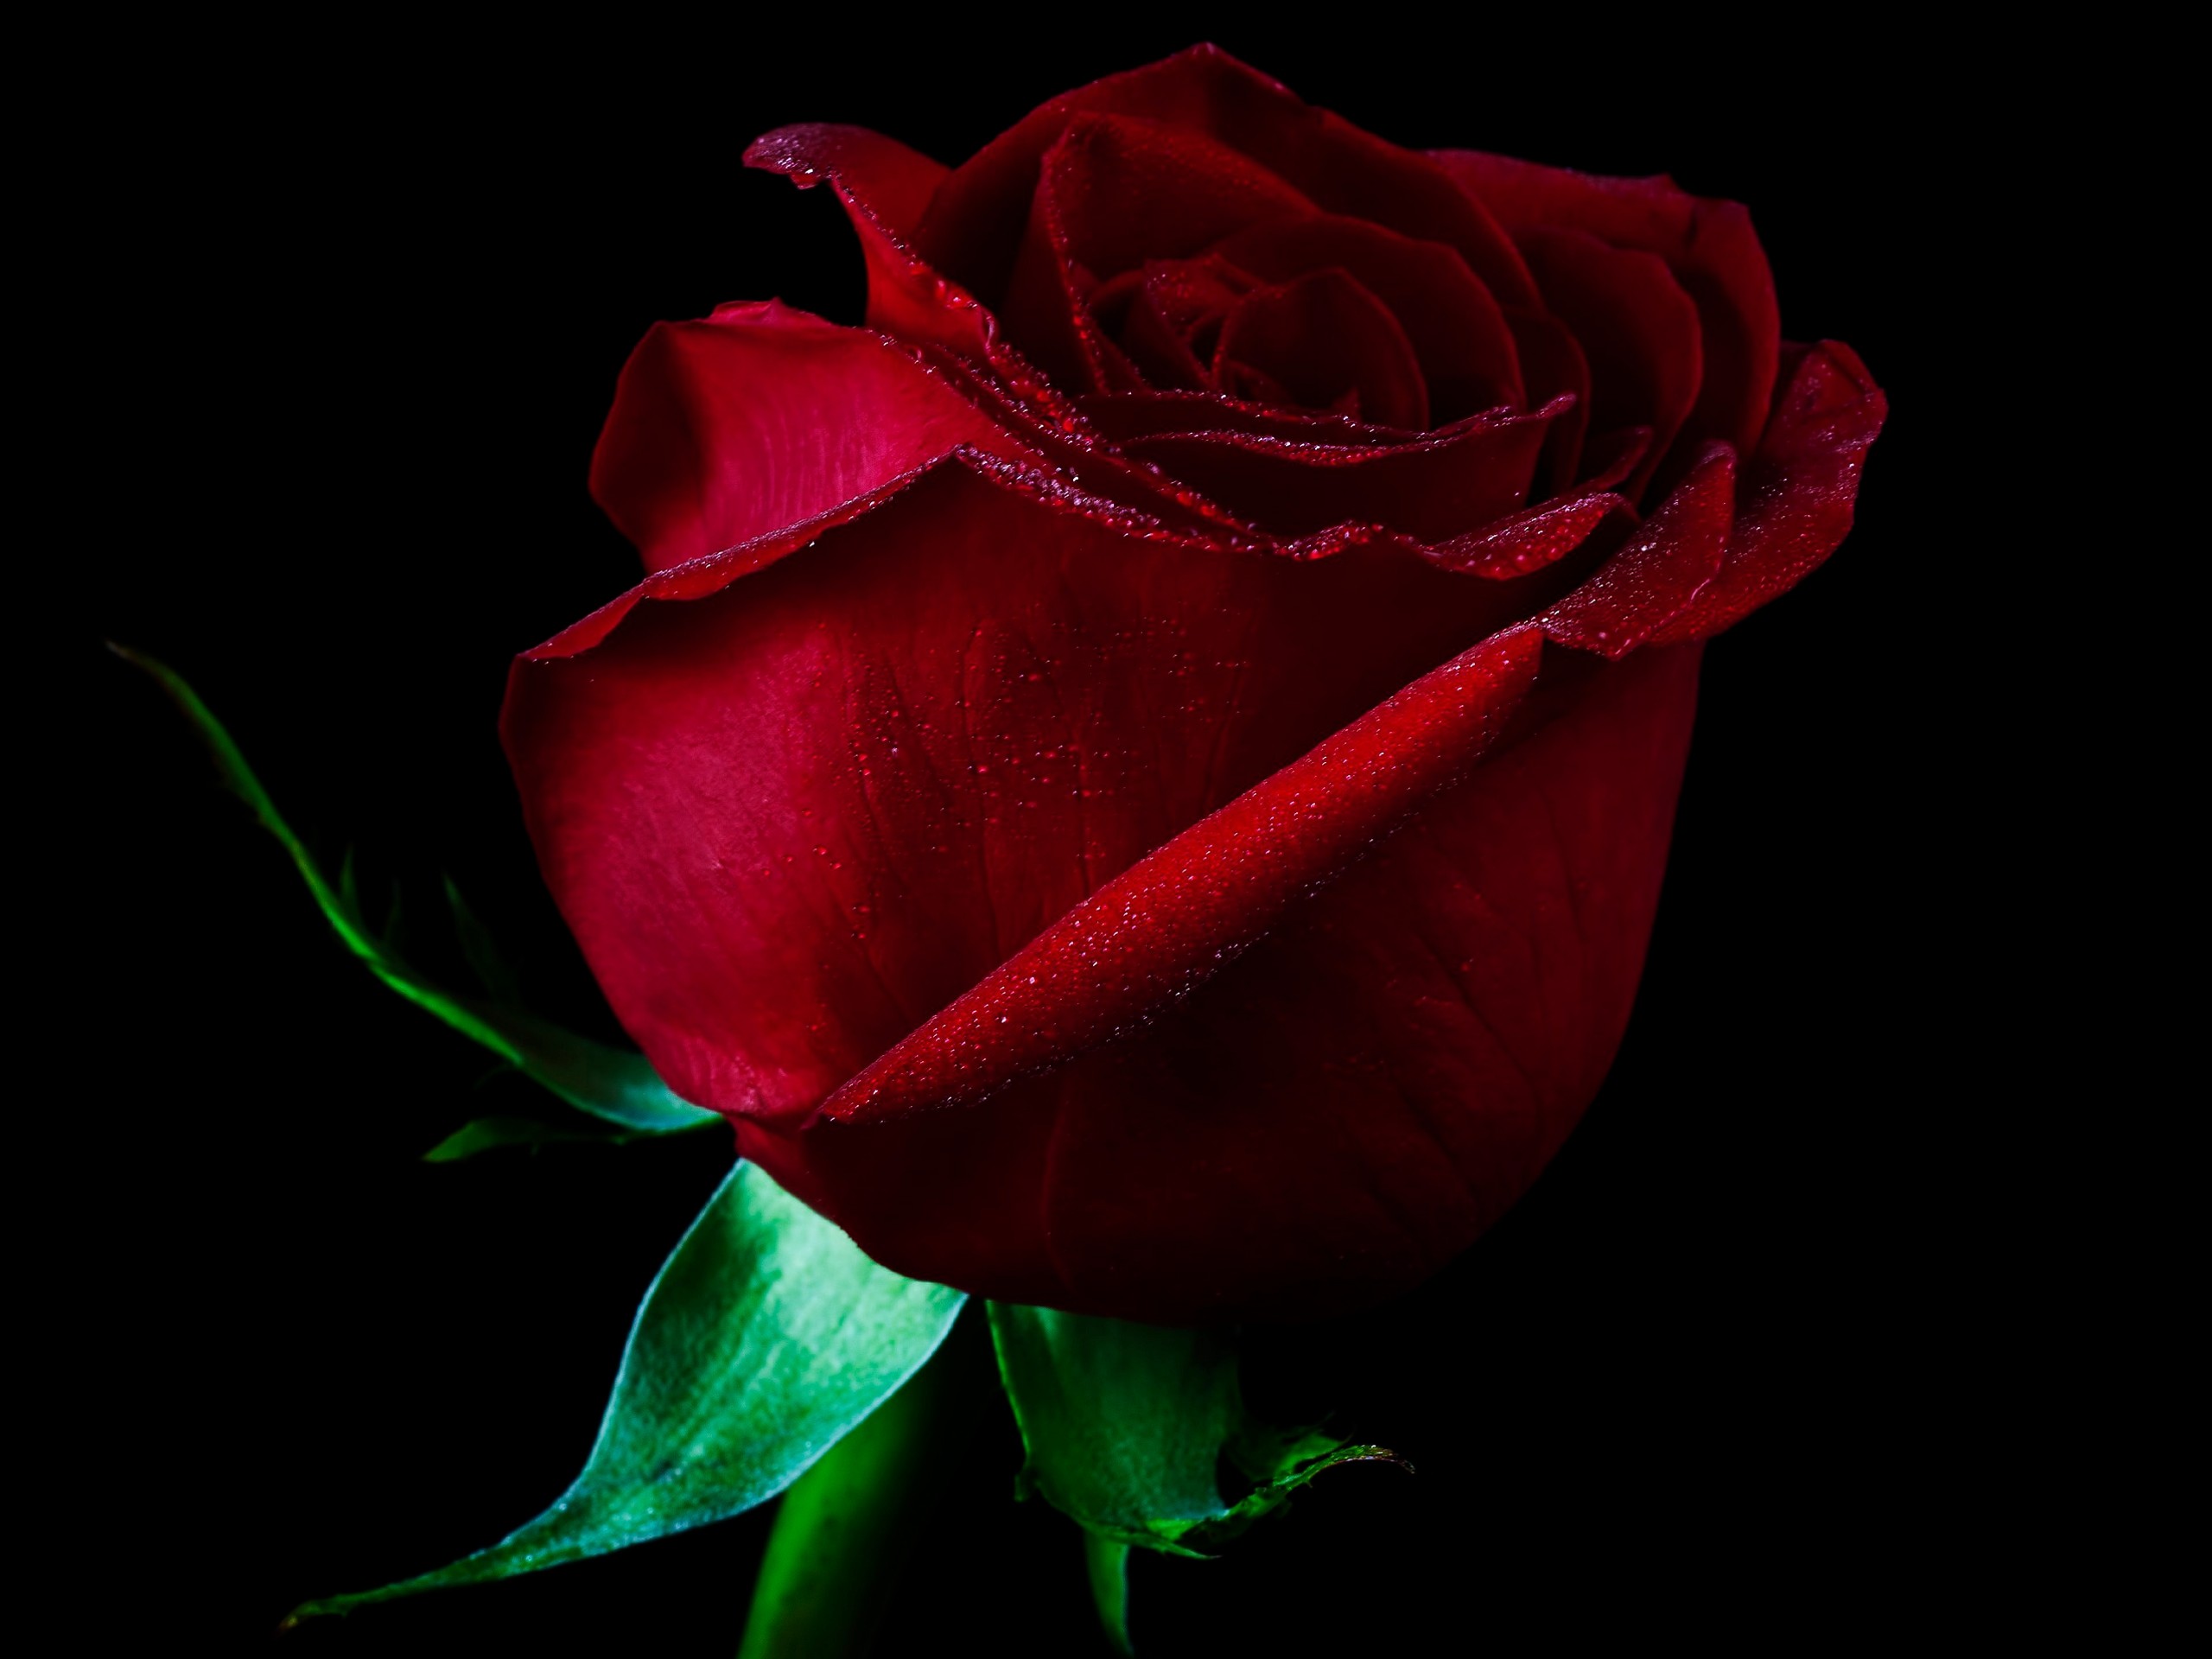 Black And Red Wallpaper Rose Red Rose With Black Backgrounds